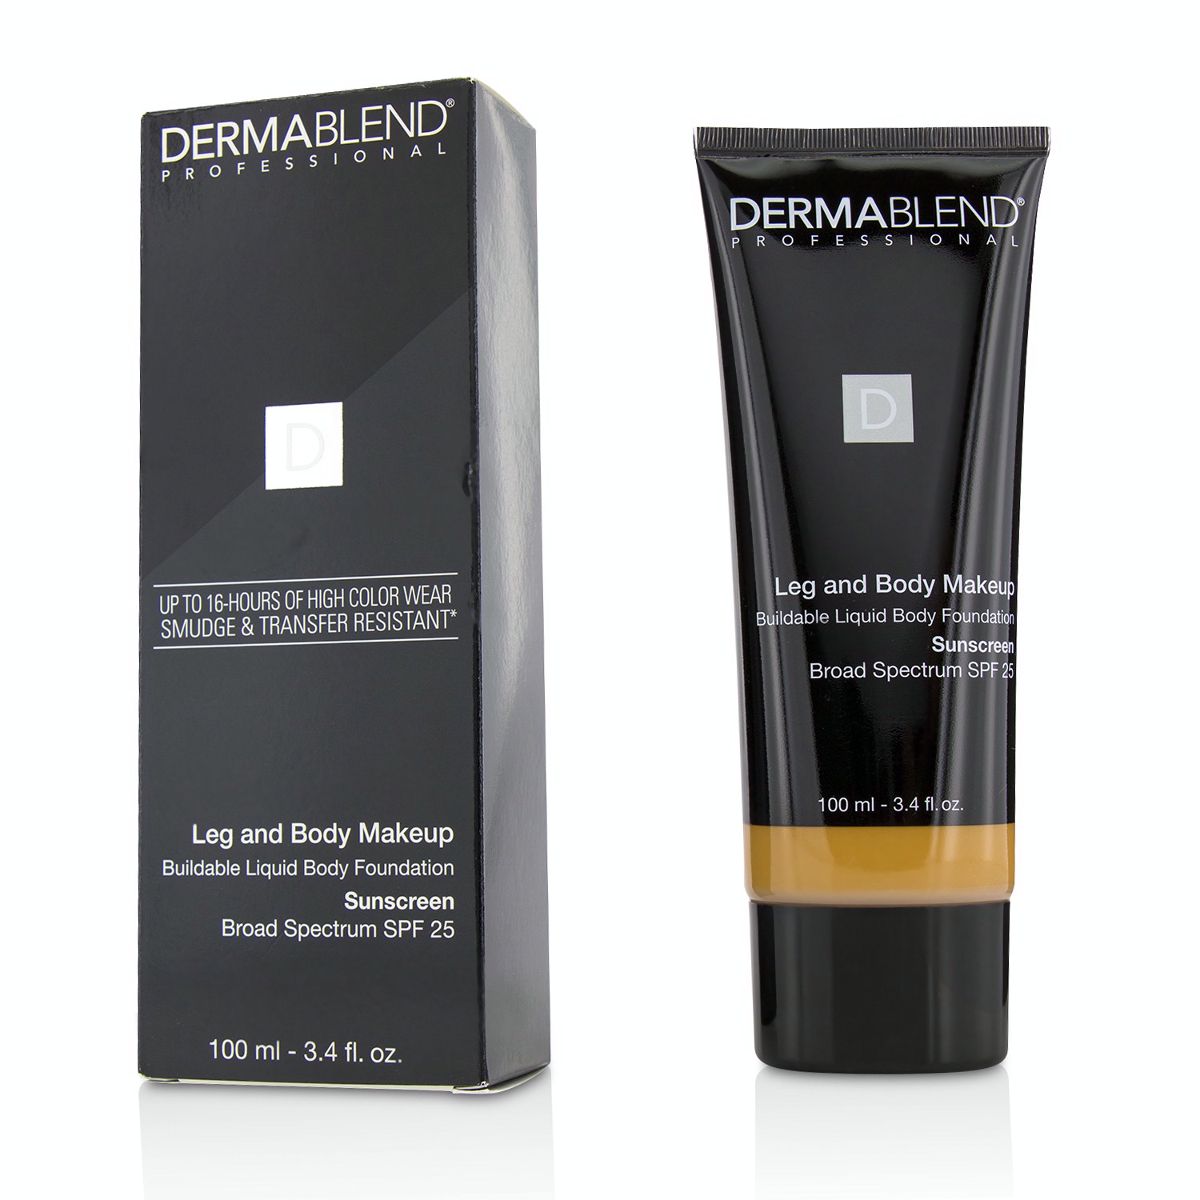 Leg and Body Make Up Buildable Liquid Body Foundation Sunscreen Broad Spectrum SPF 25 - #Tan Honey 45W Dermablend Image